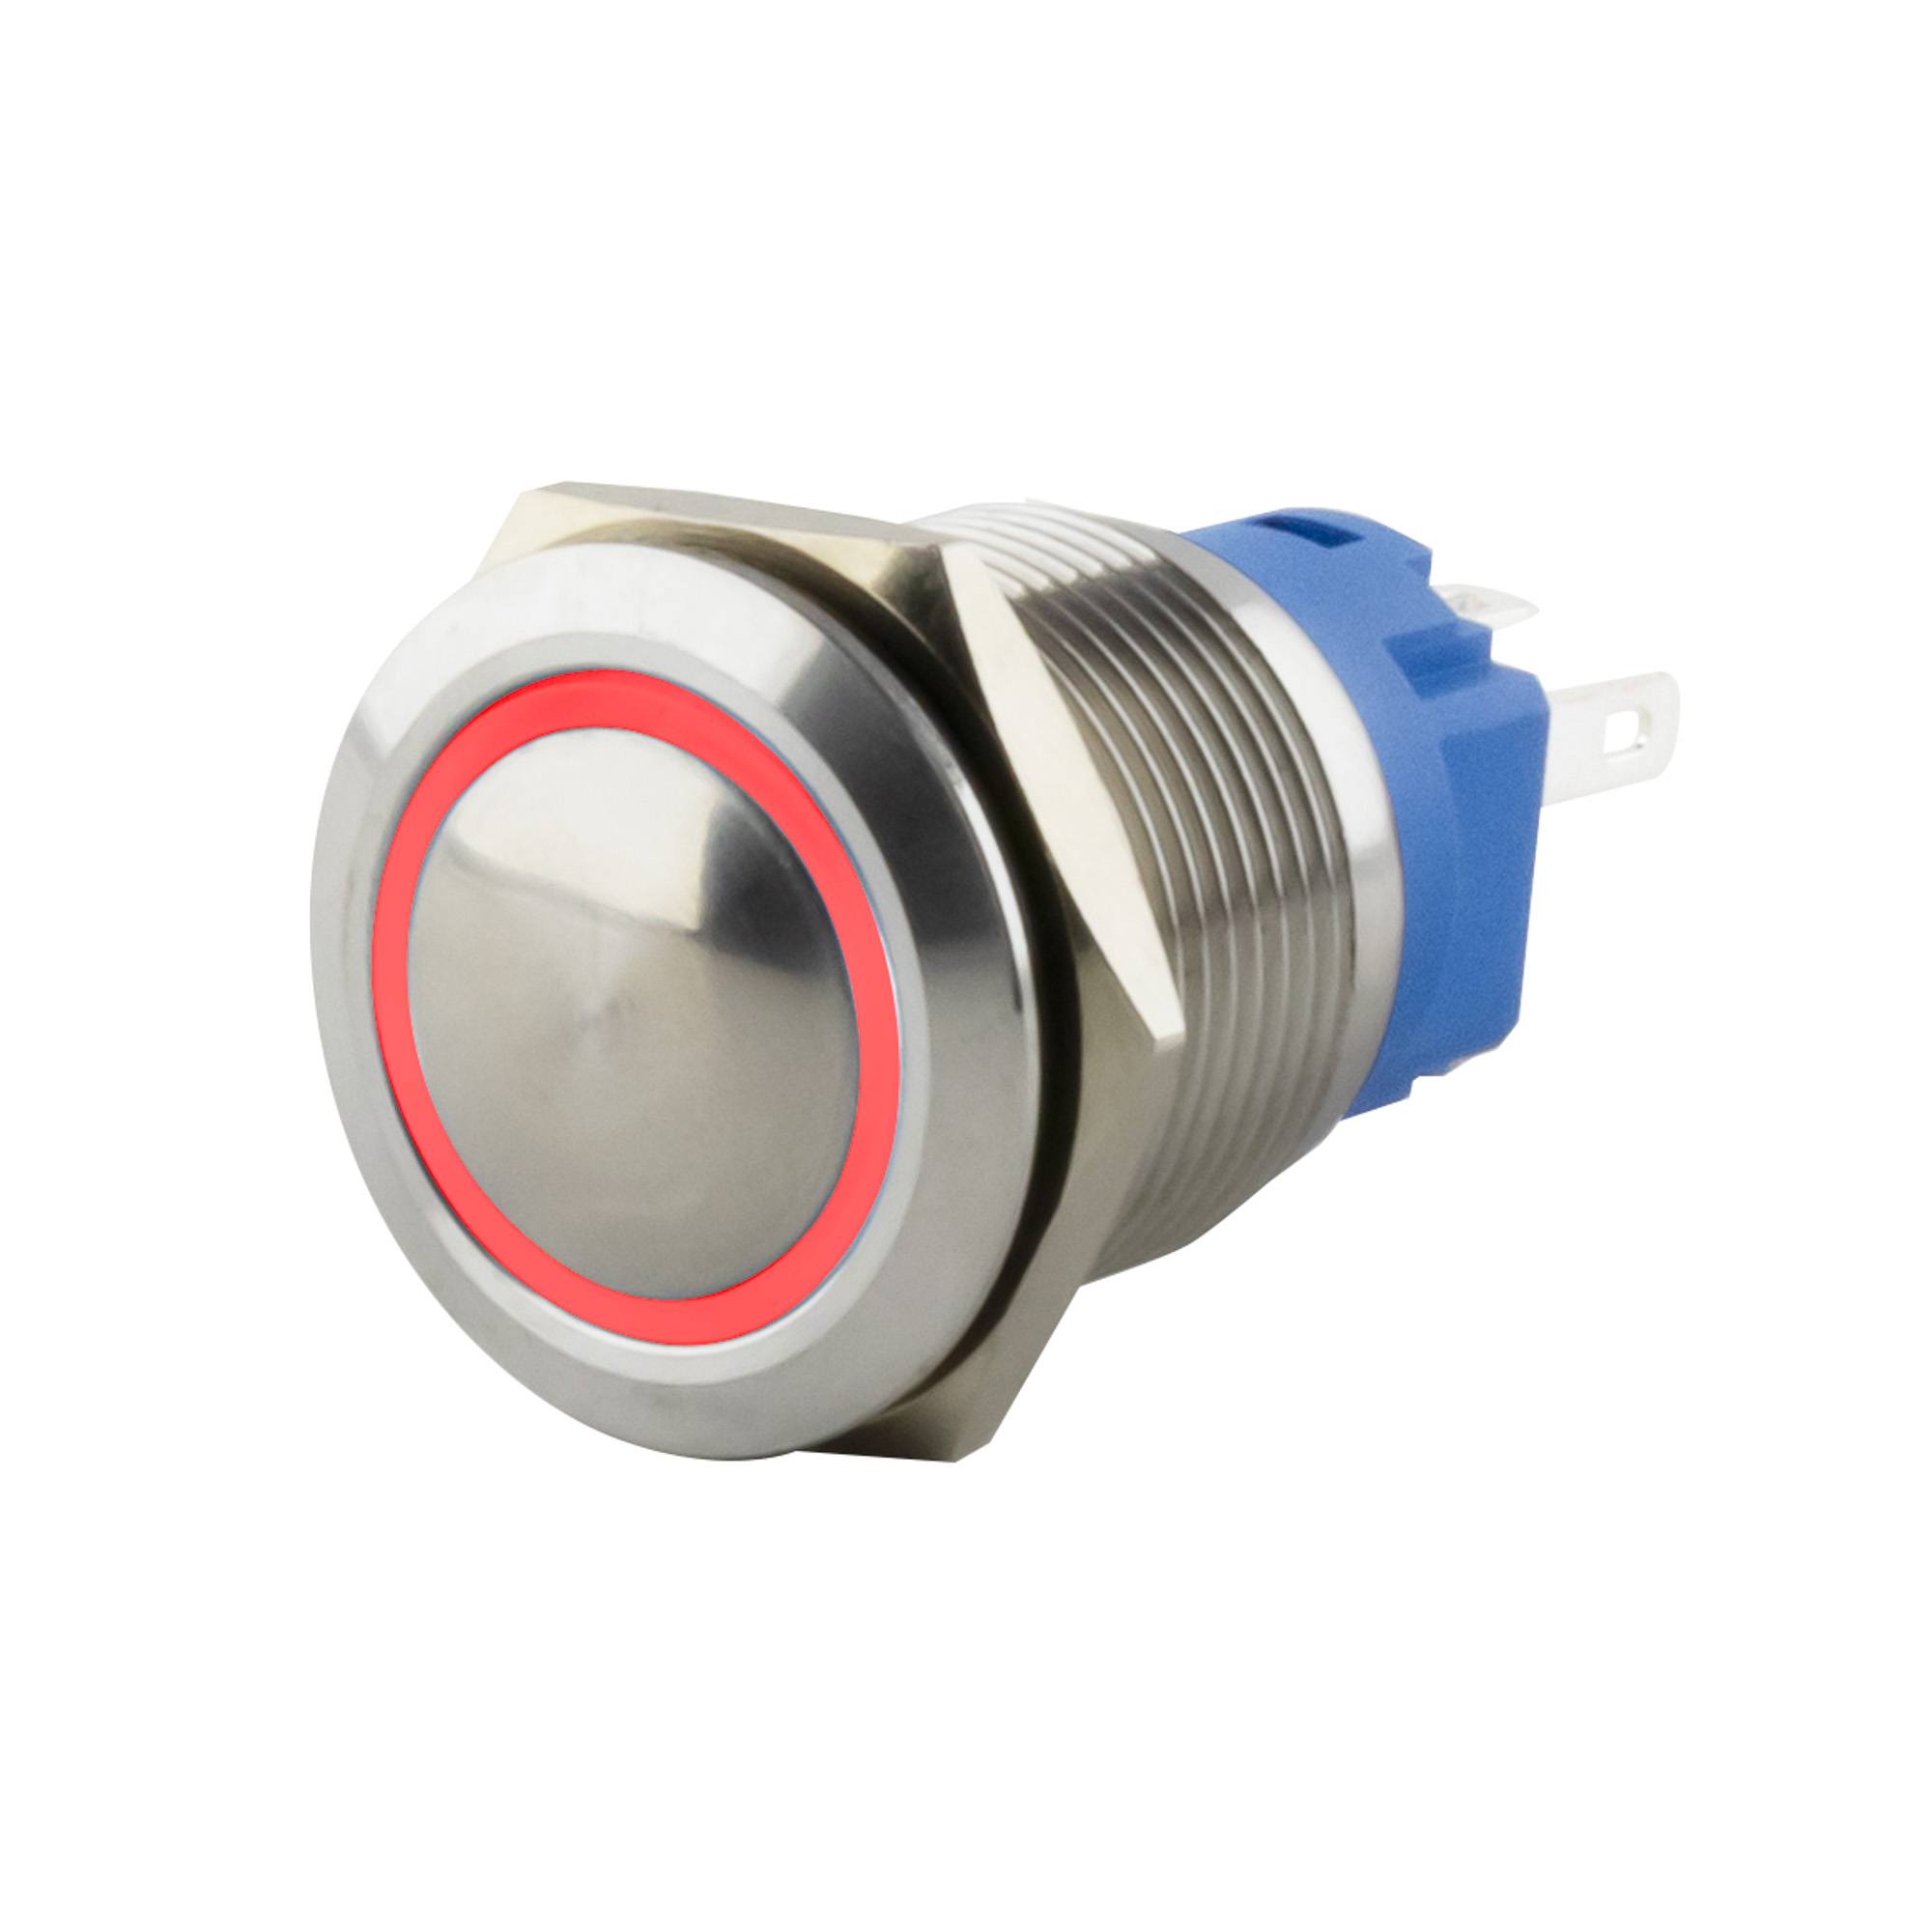 Push-buttons momentary 19mm - led ring